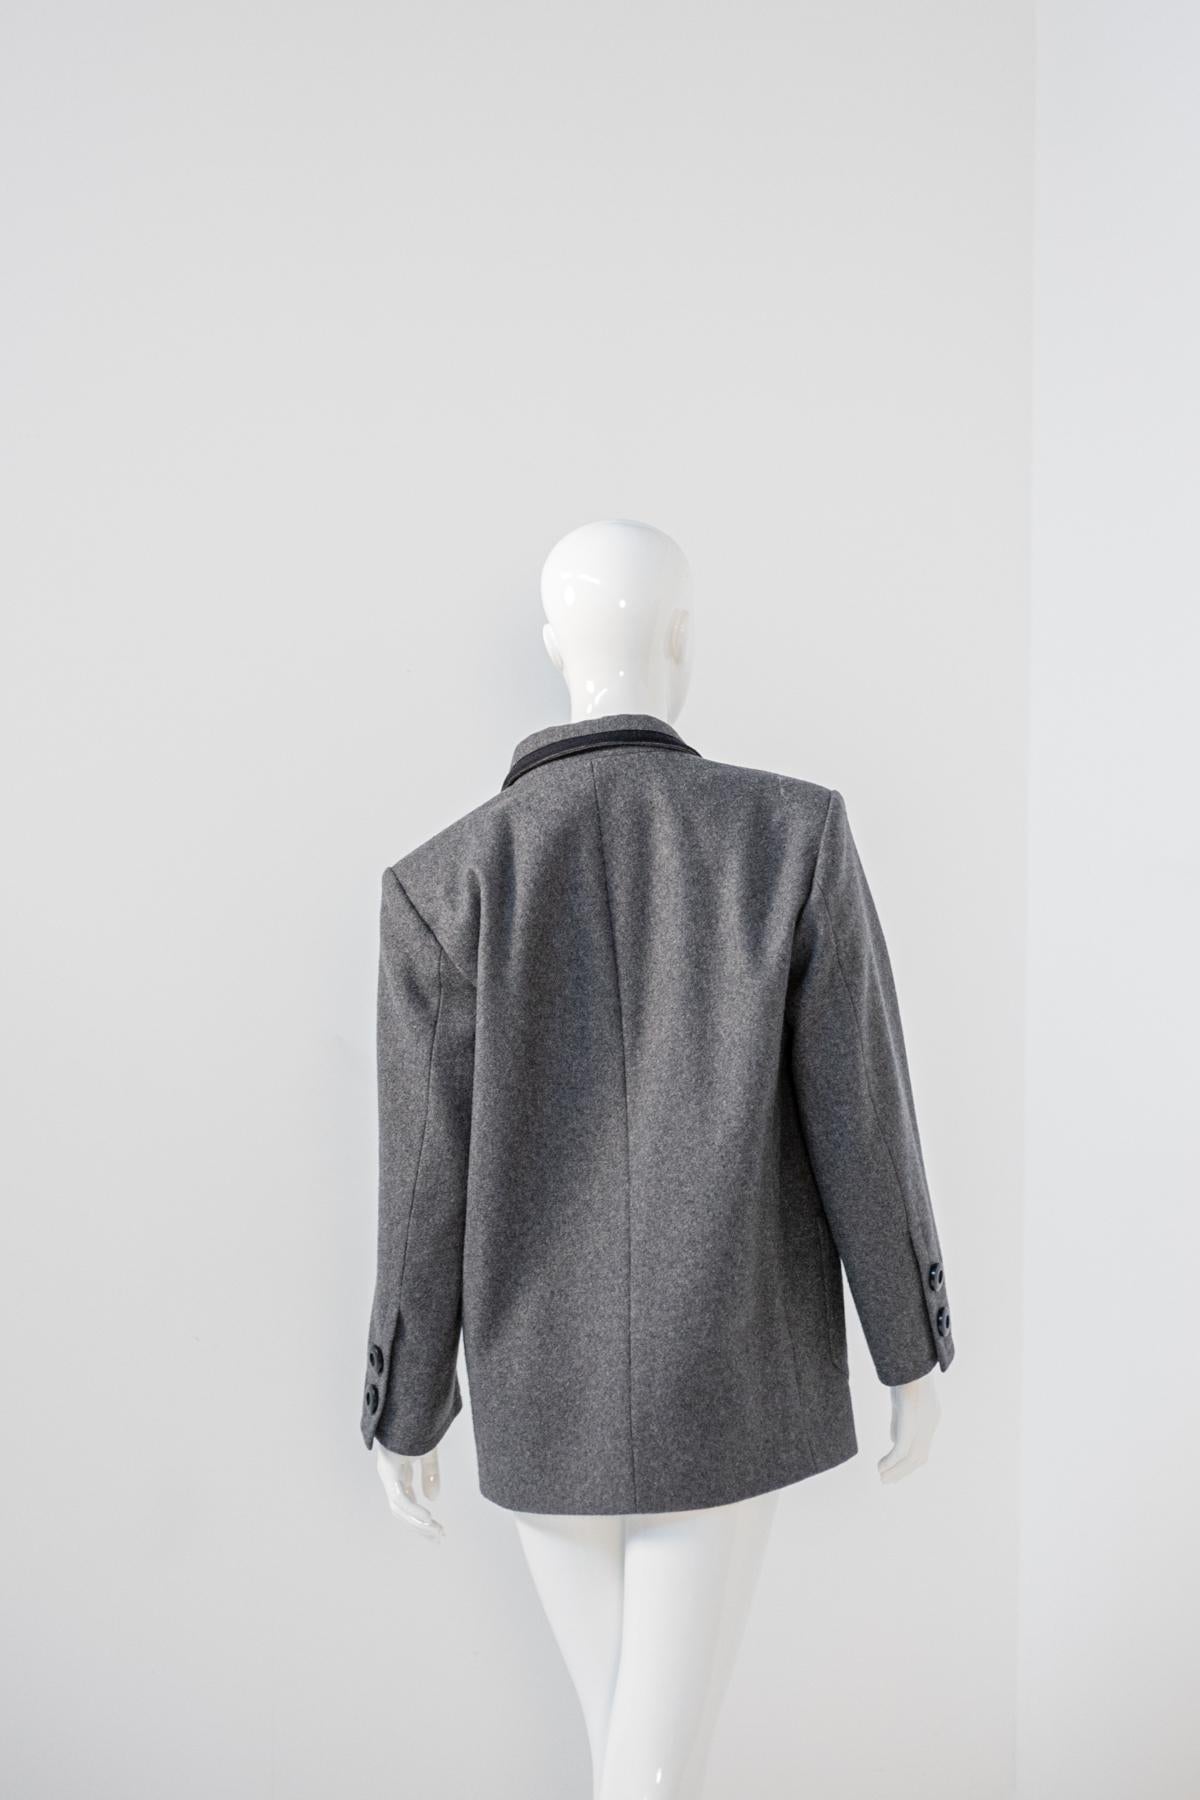 Yves Saint Laurent Double Breasted Wool Blazer For Sale 5